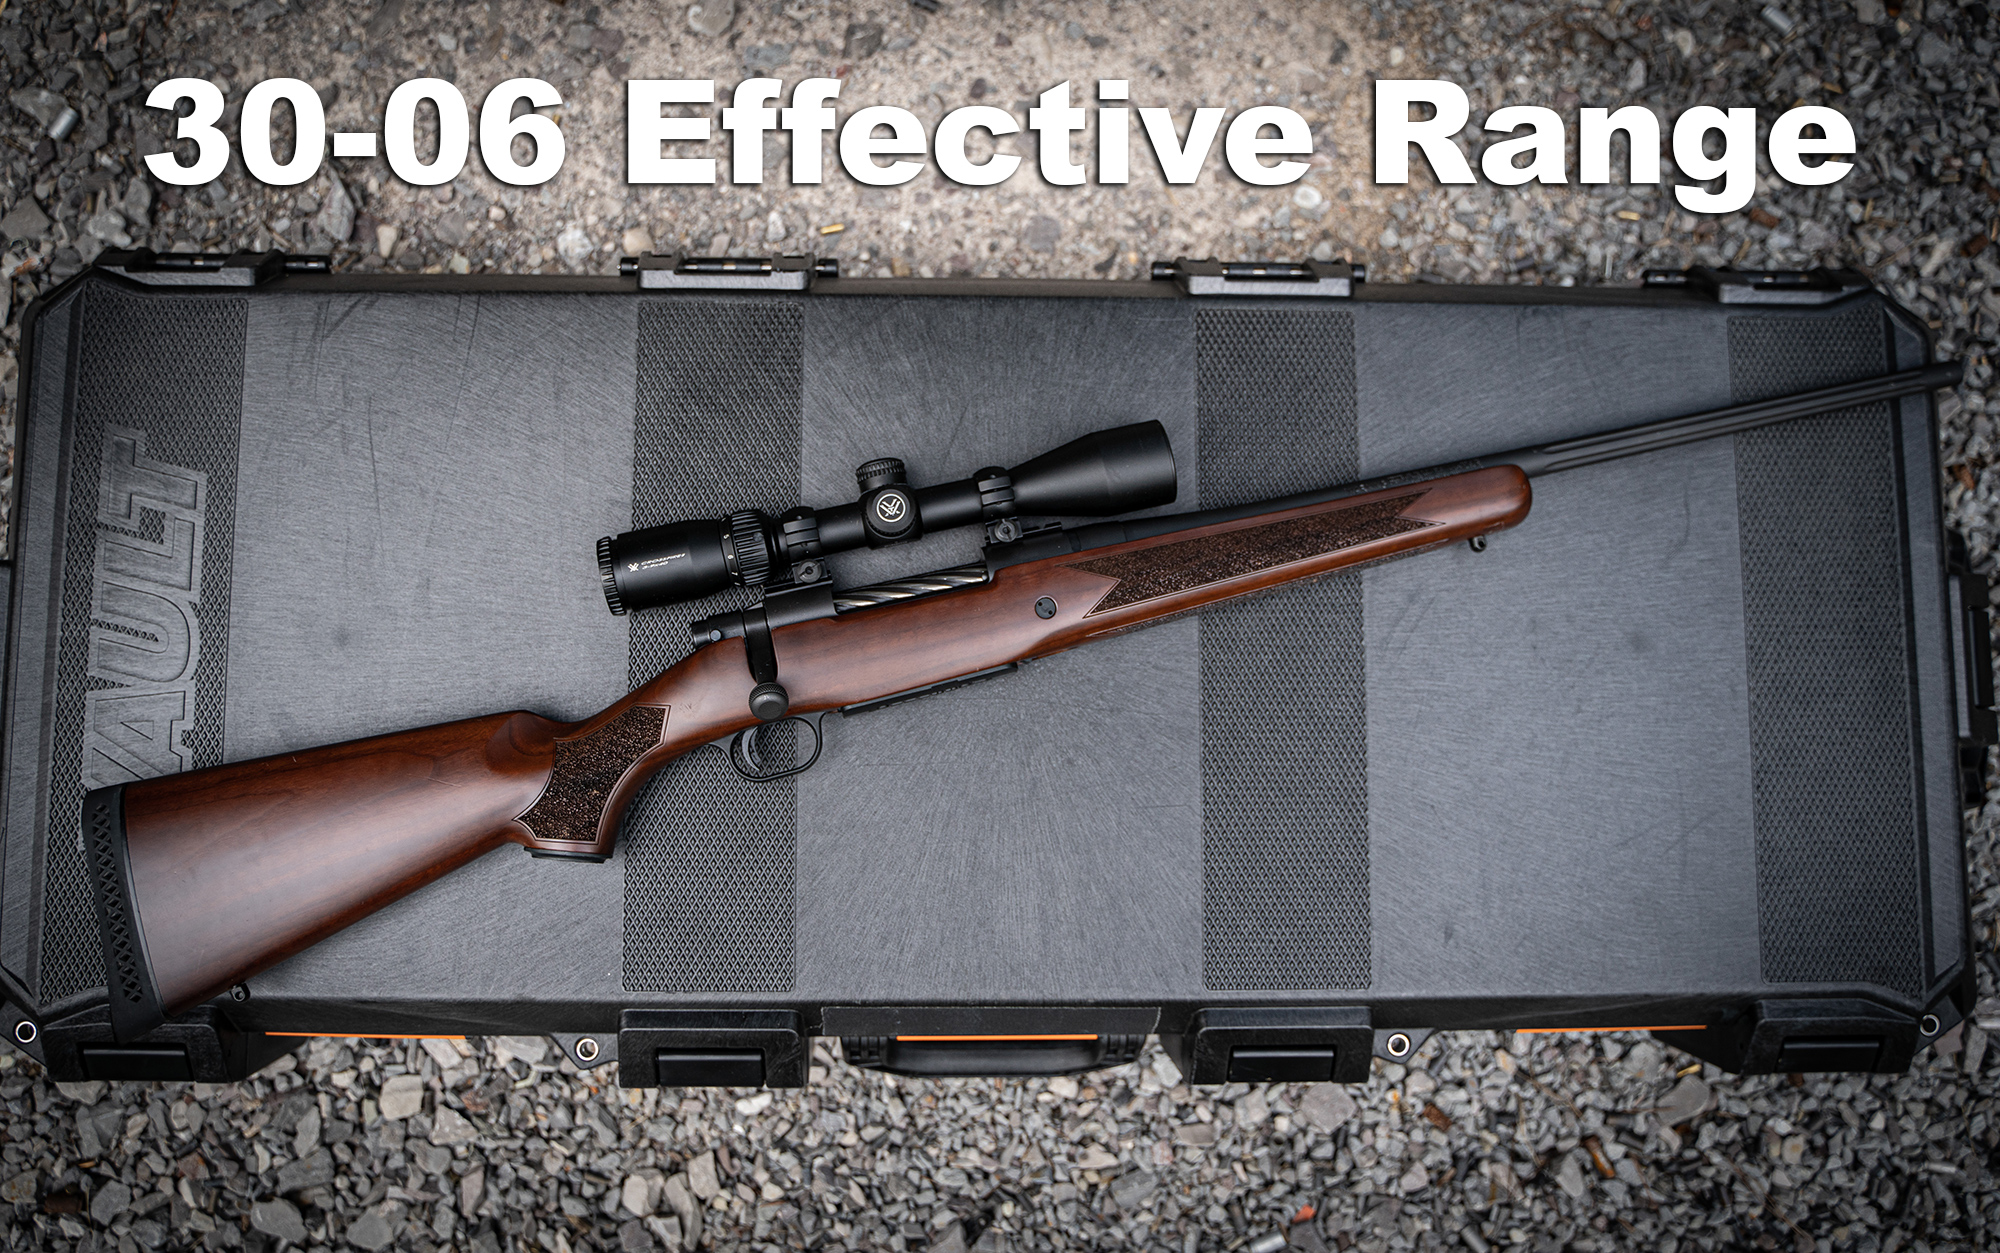 30-06 effective range with a rifle on a case